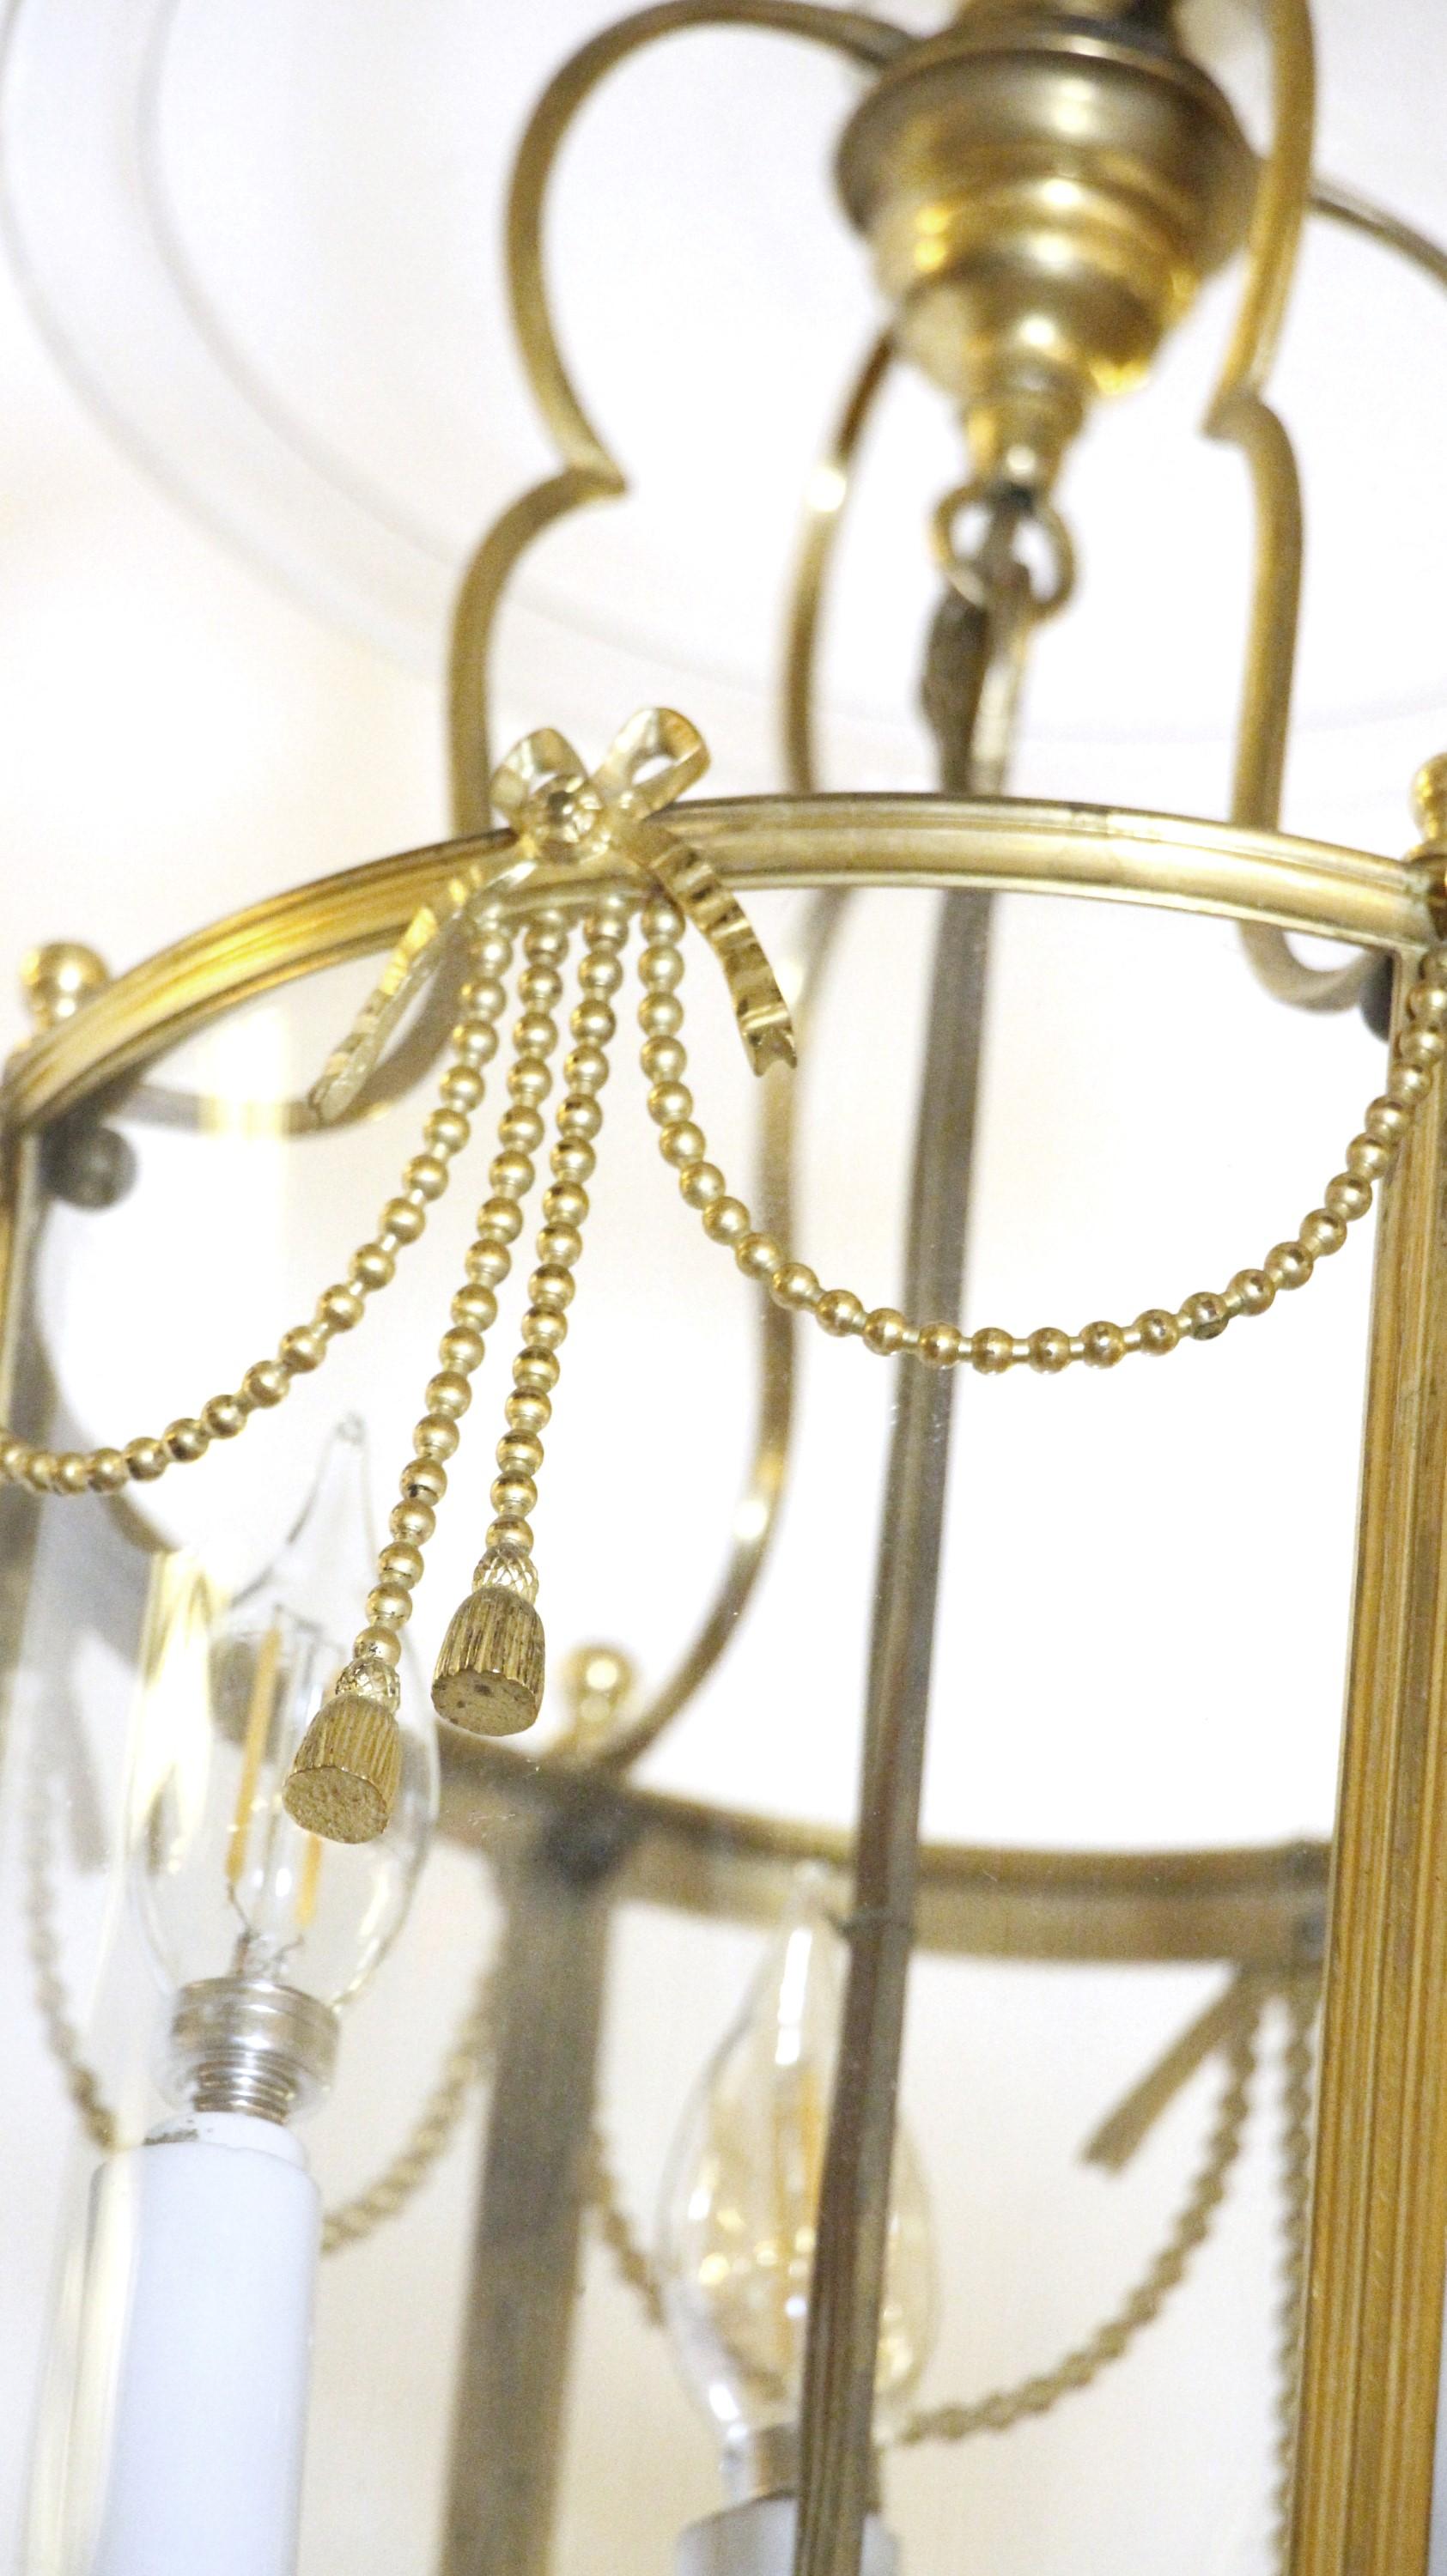 French Gilded Lantern Light - 3-Arms w/ Tassels & Ribbons In Good Condition For Sale In New York, NY